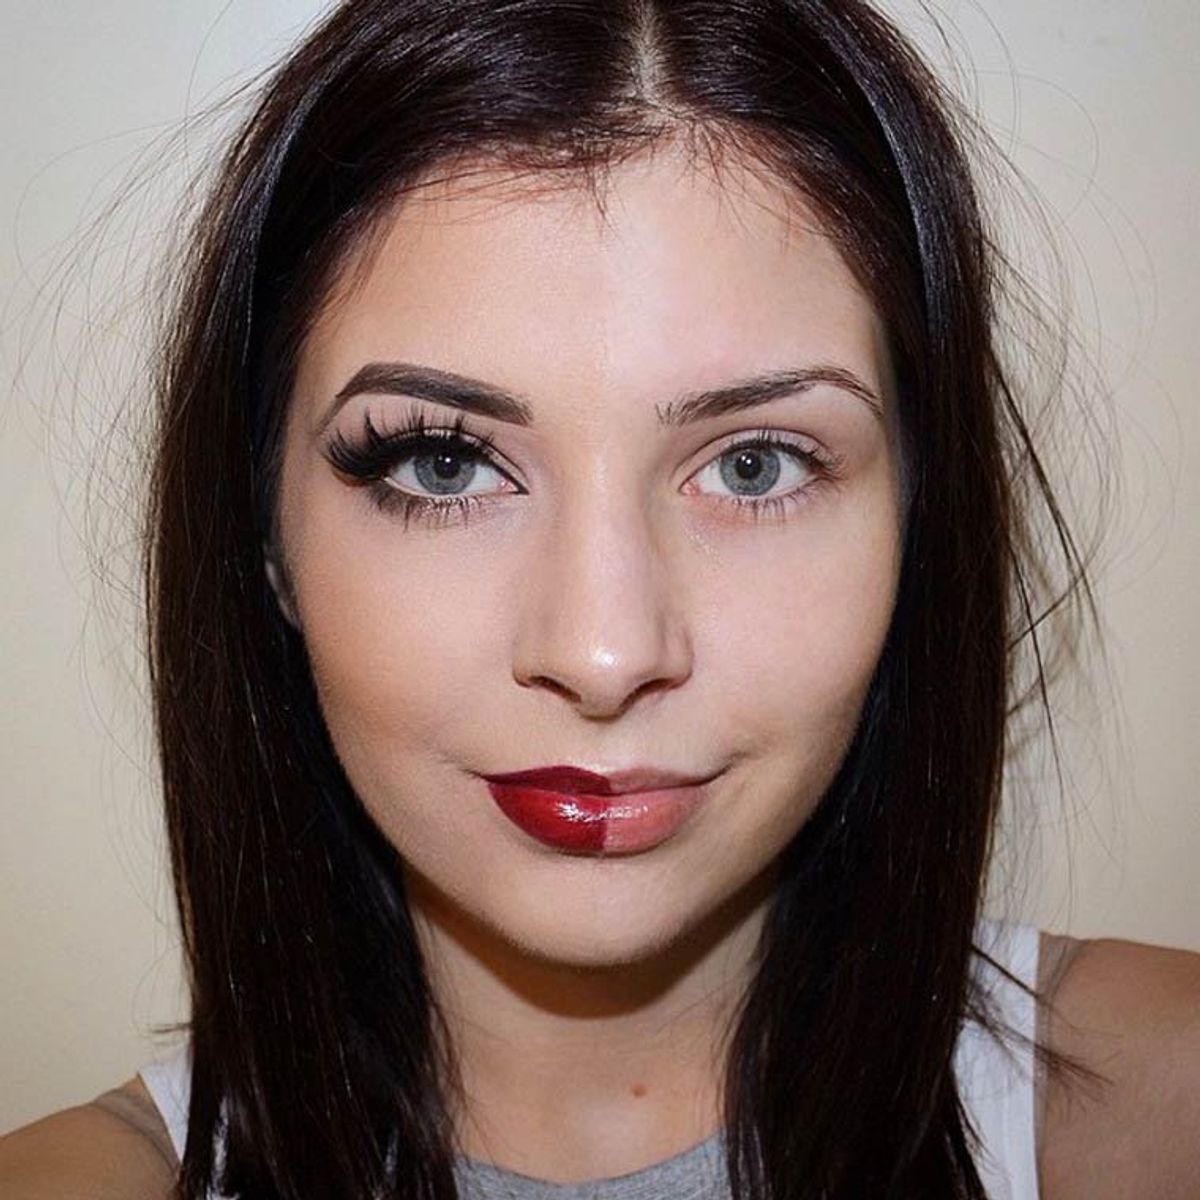 Why You Should Stop Humiliating the Girls Who Always Wear Makeup